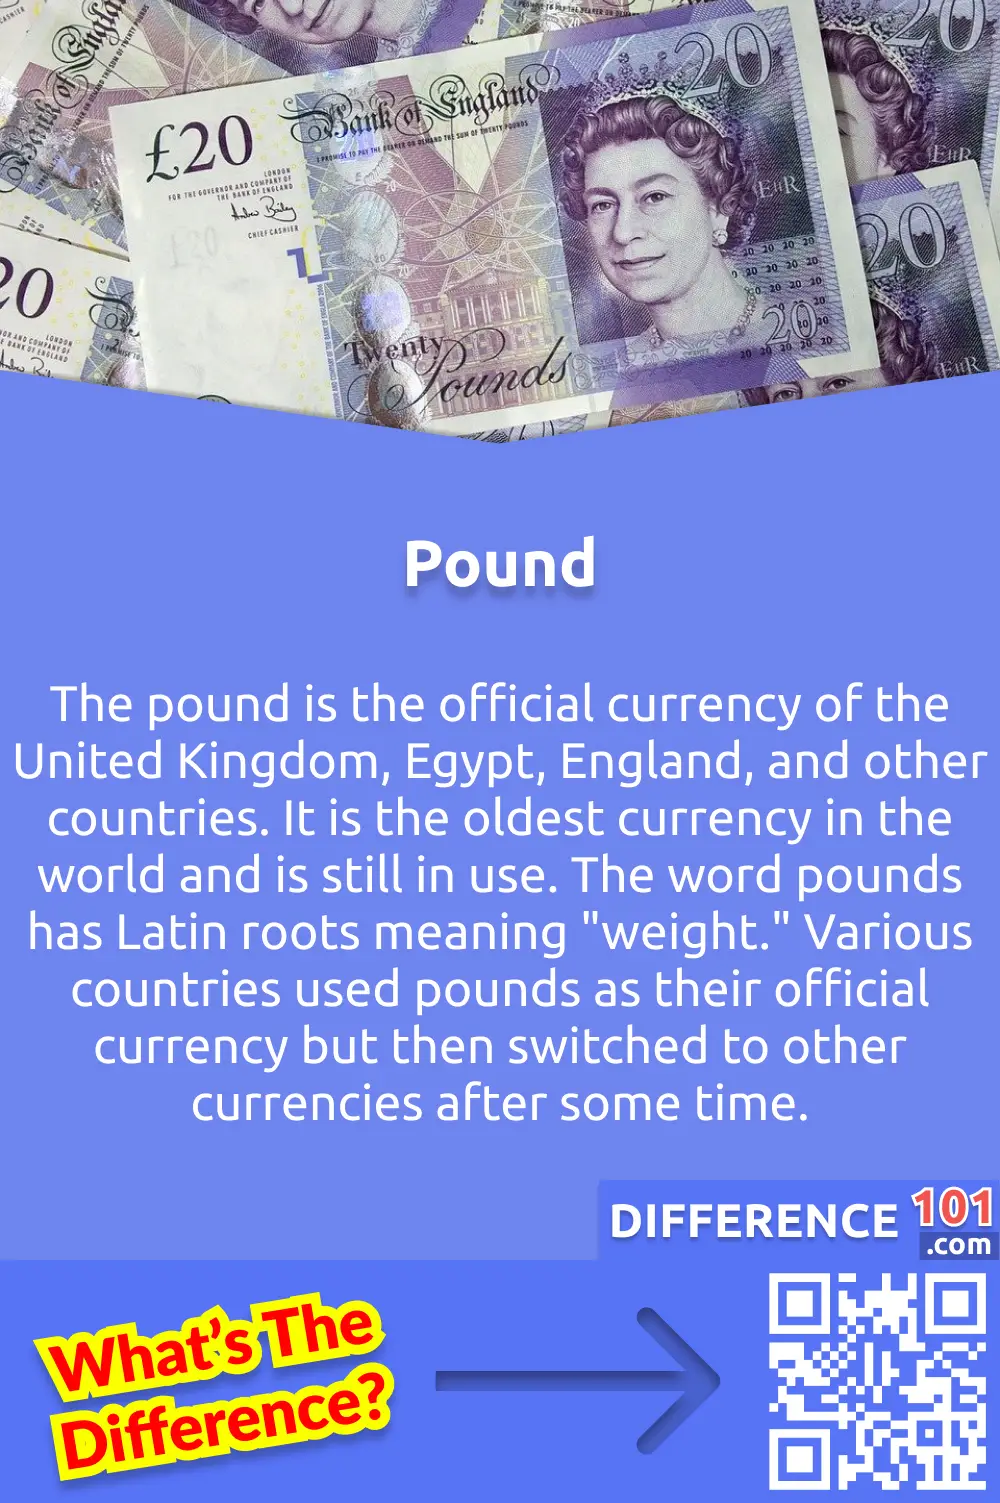 What Is Pound? The pound is the official currency of the United Kingdom, Egypt, England, and other countries. It is the oldest currency in the world and is still in use. The word pounds has Latin roots meaning "weight." Various countries used pounds as their official currency but then switched to other currencies after some time.